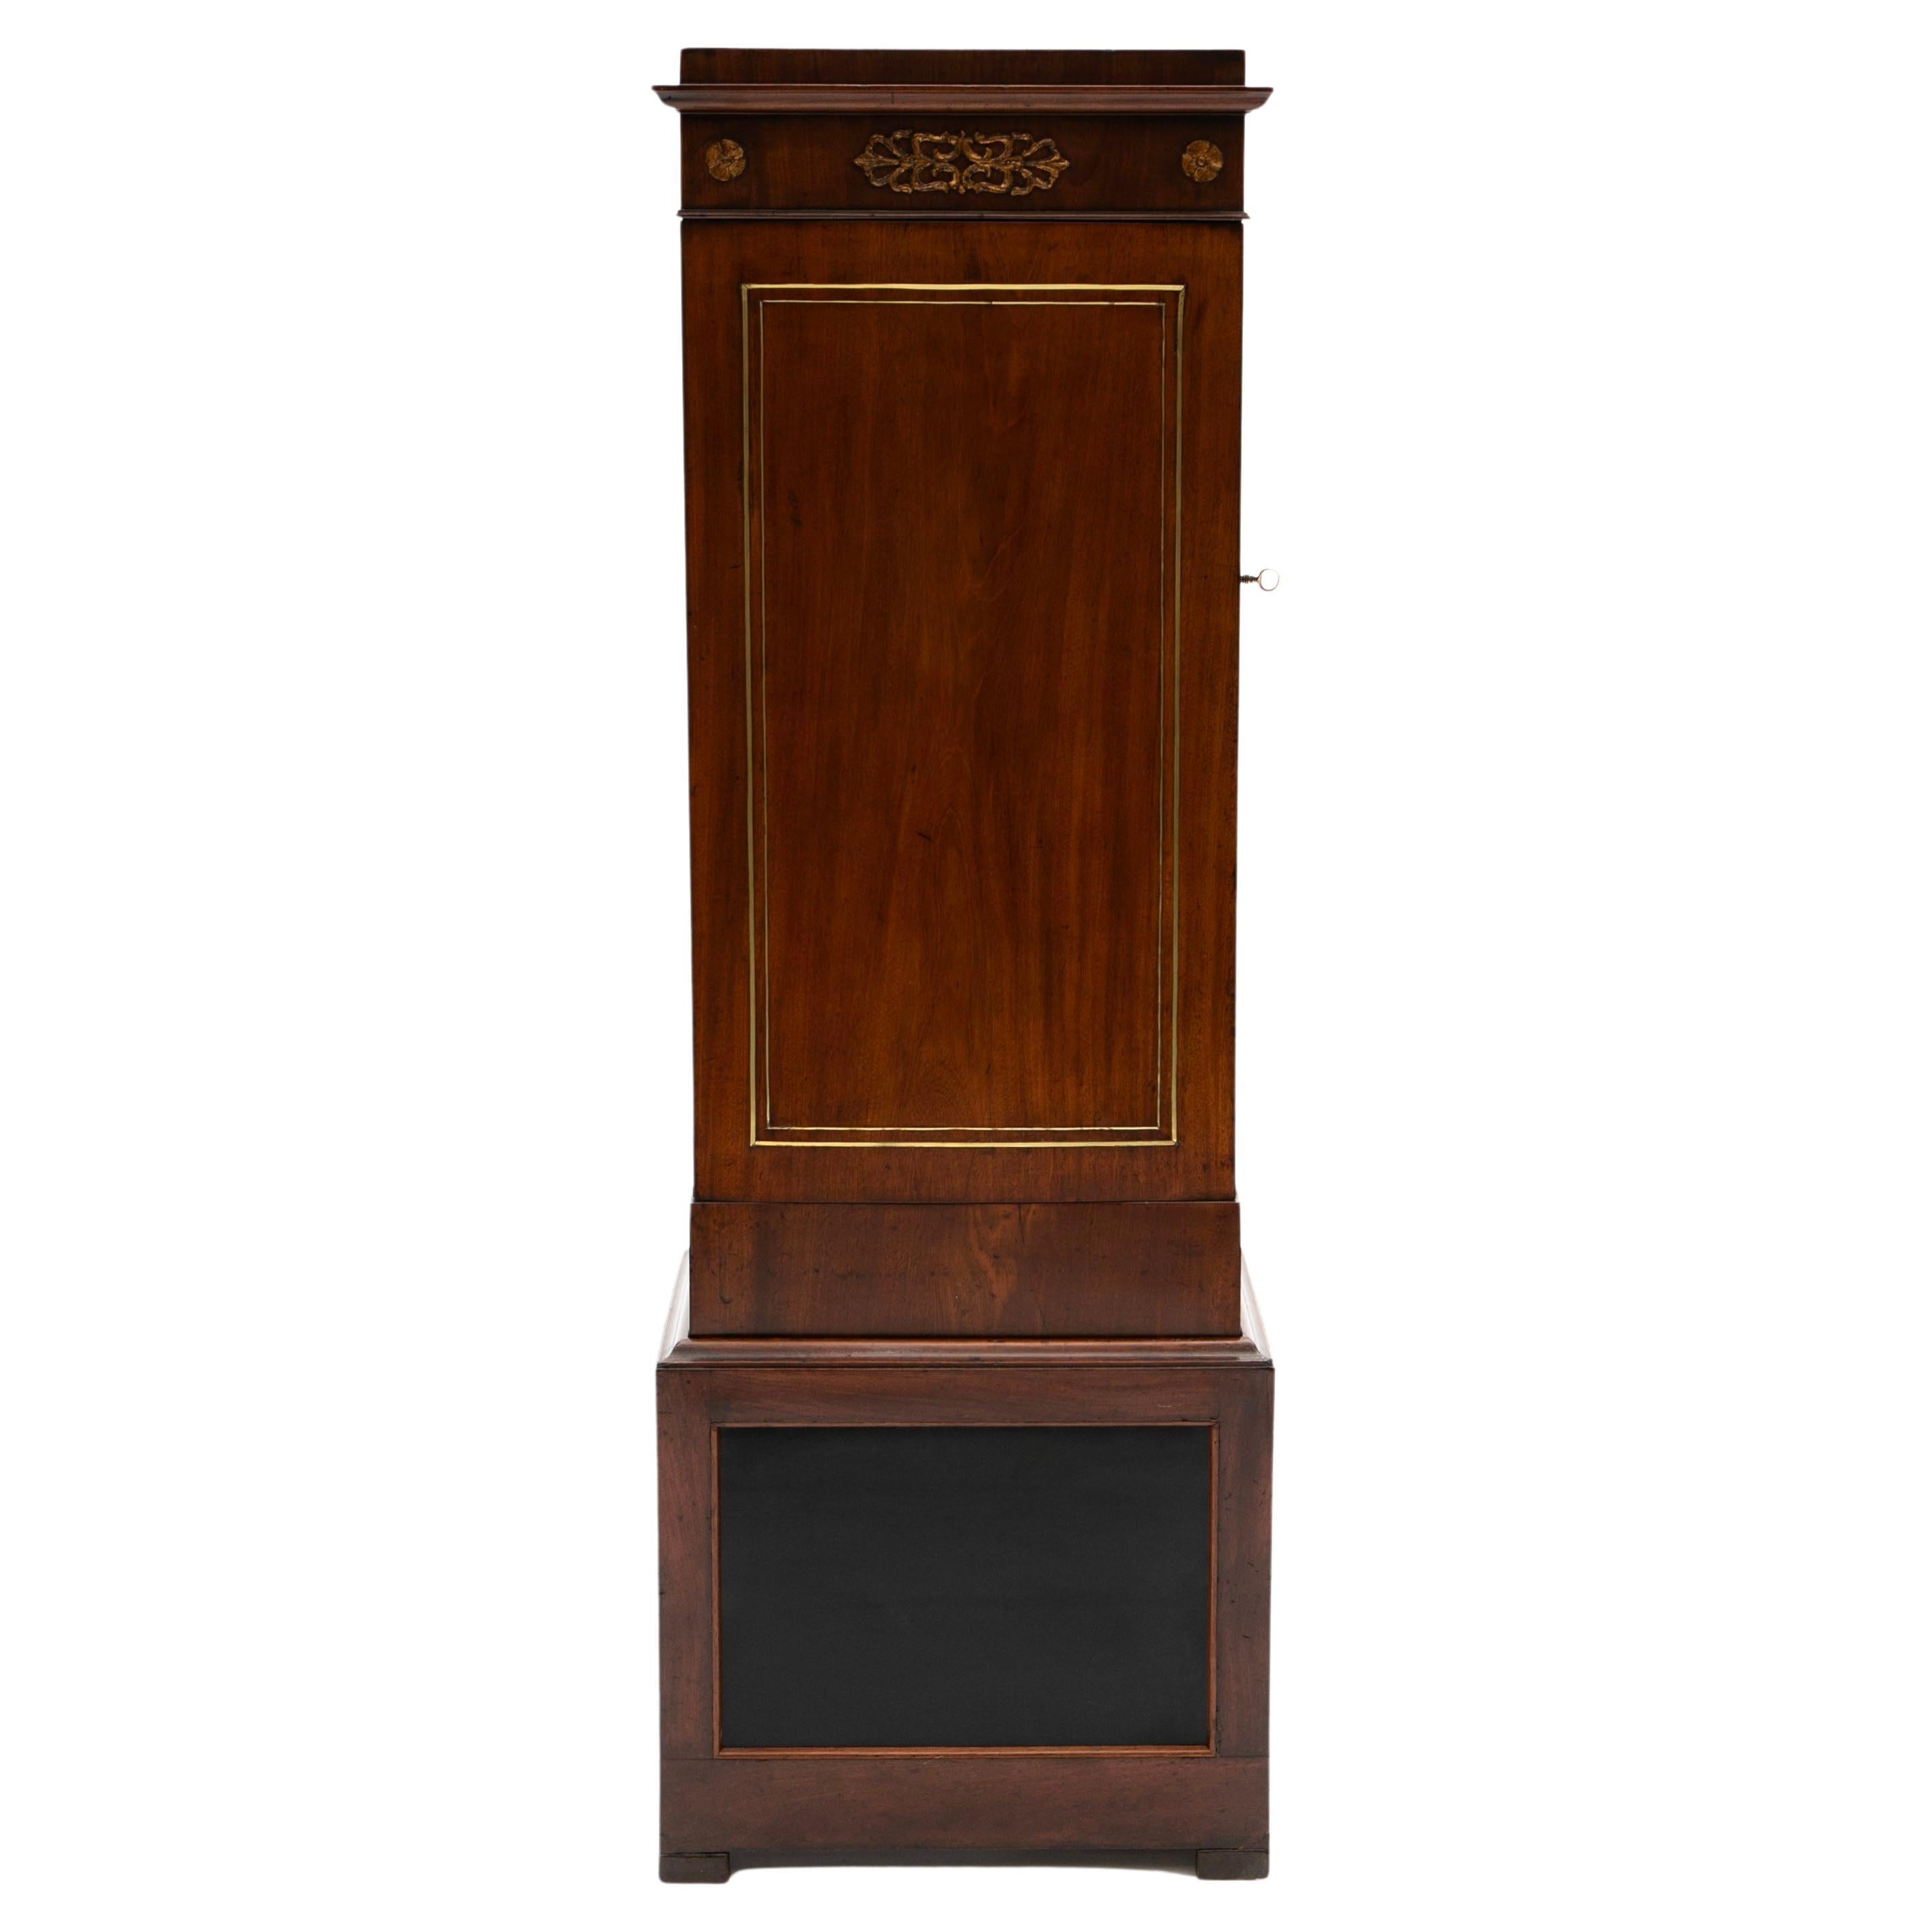 Elegant Early 19th Century Empire Mahogany Pedestal Cabinet For Sale